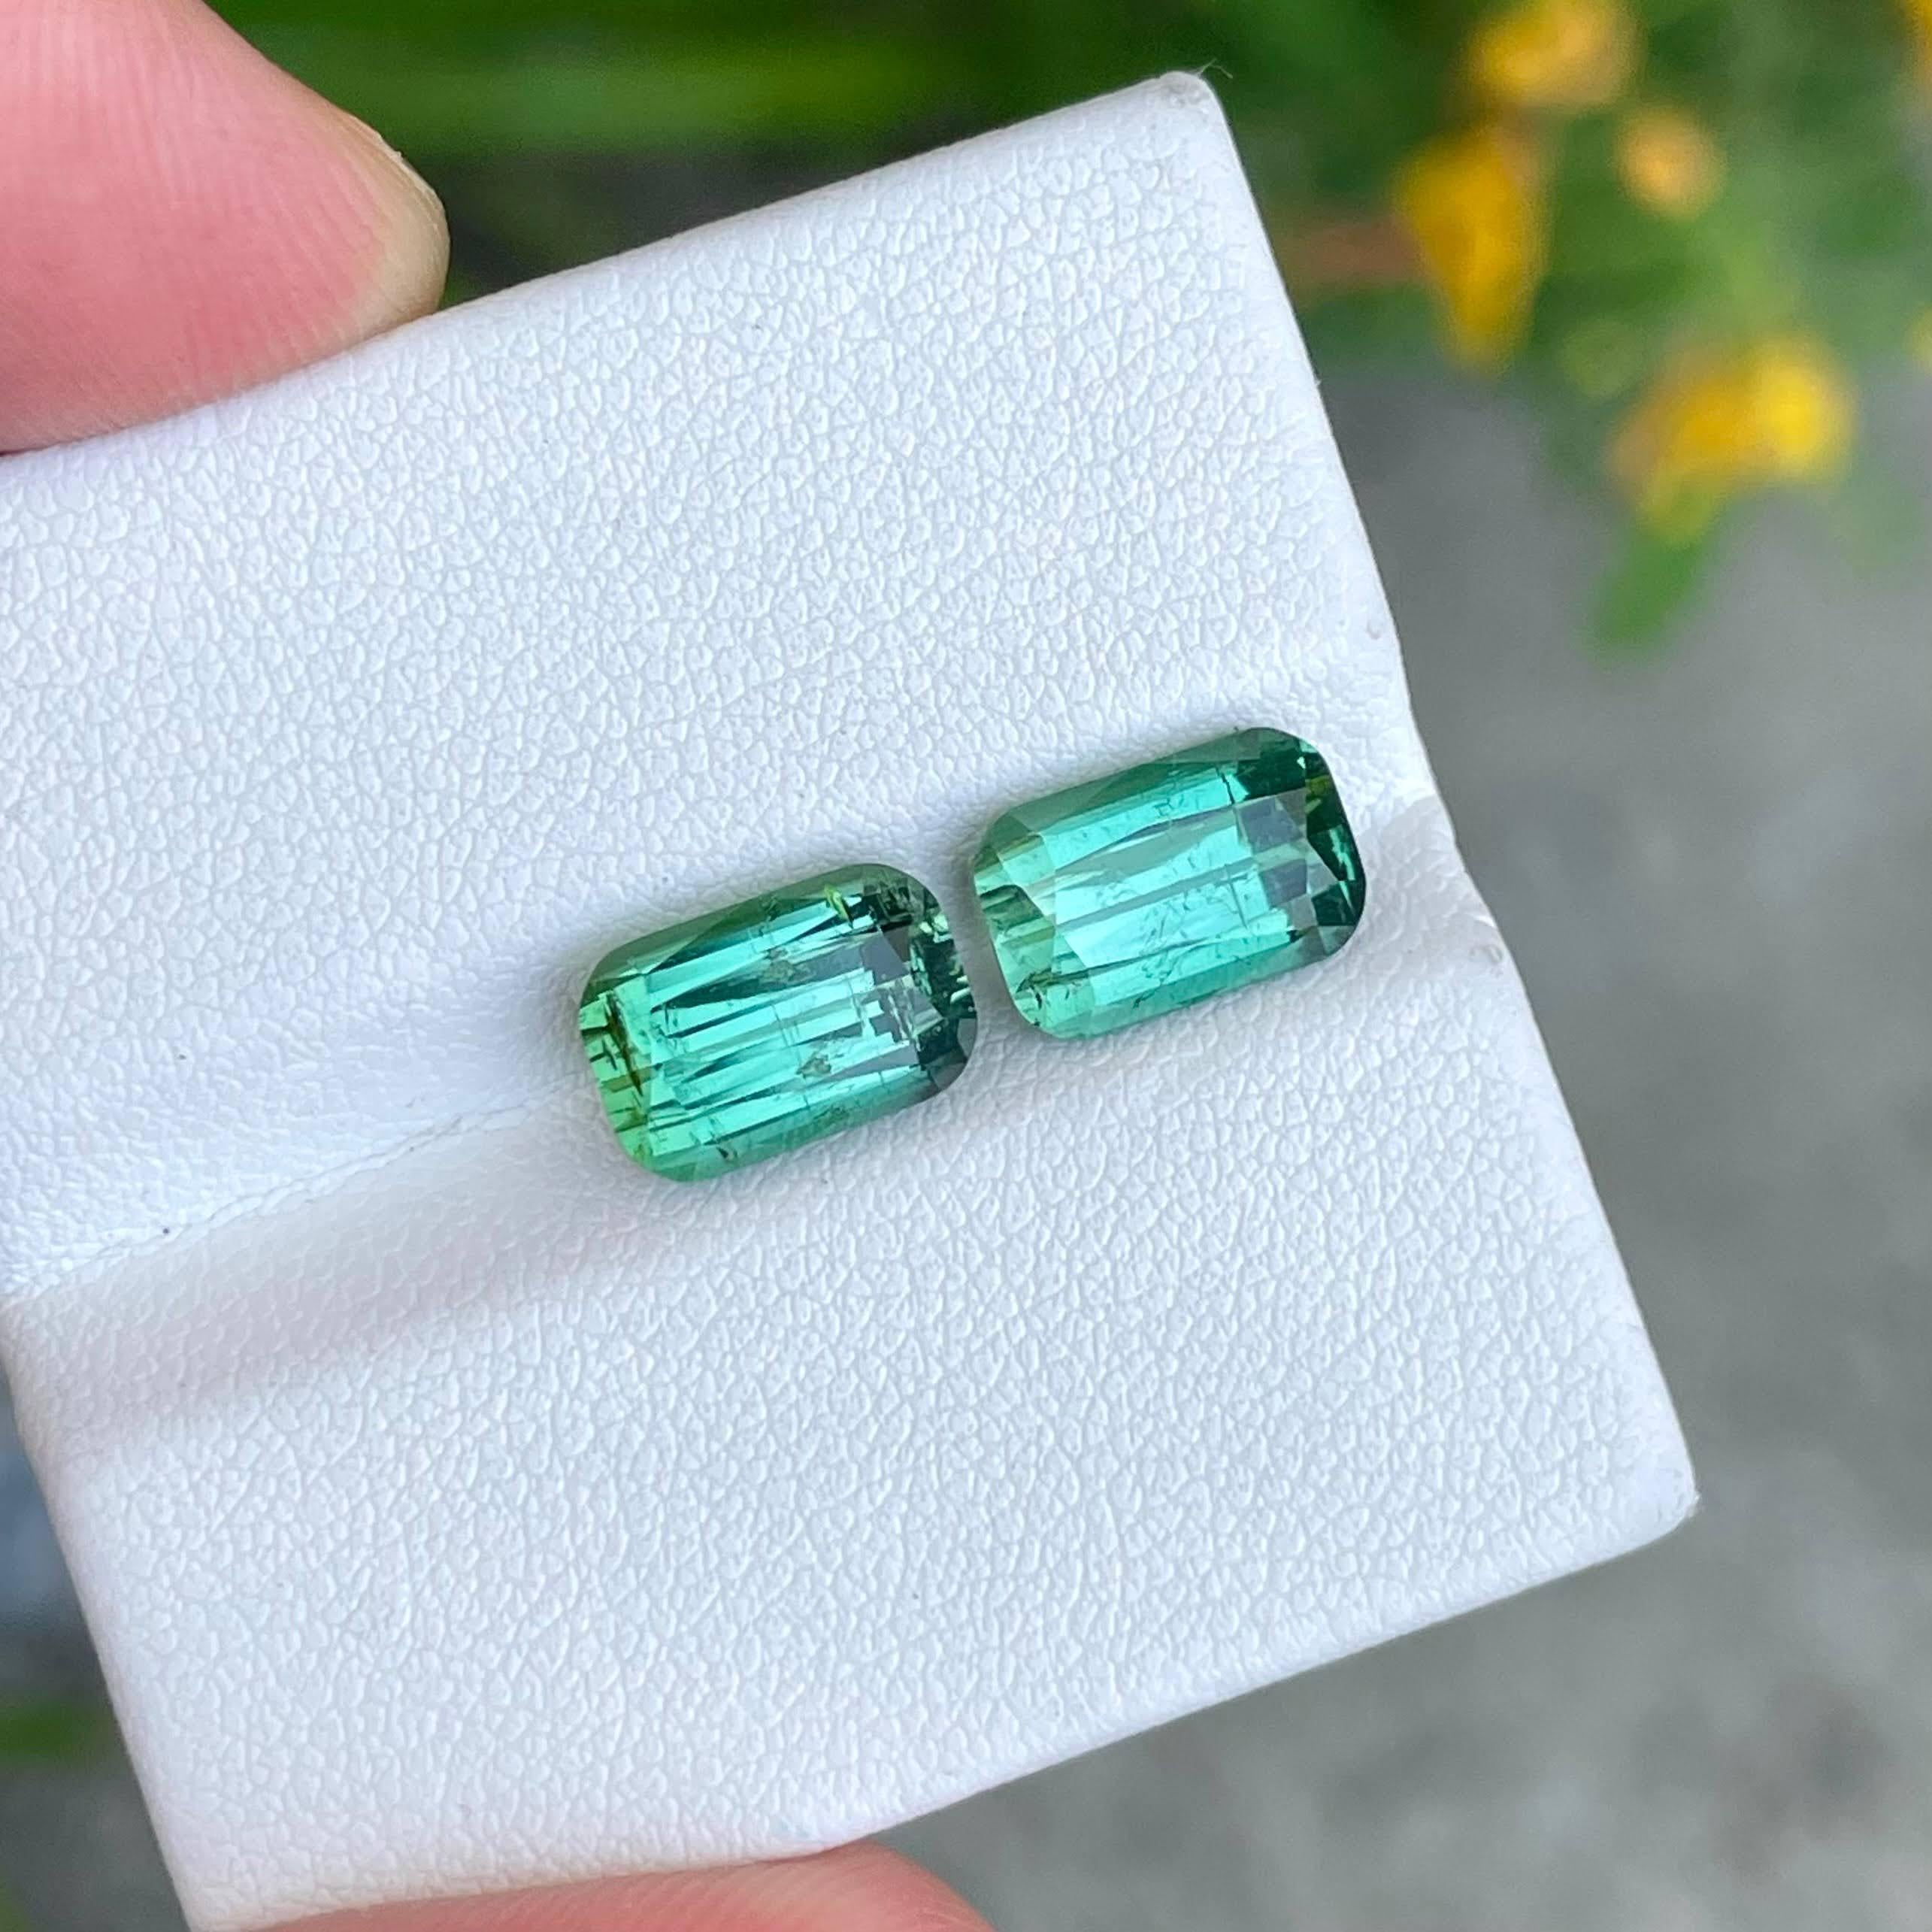 Weight 7.31 carats
Dimensions 10.1x6.6x6.0 mm
Treatment none 
Clarity SI
Origin Afghanistan 
Shape cushion 
Cut fancy cushion 




This exquisite pair of greenish-blue tourmalines boasts a total weight of 7.31 carats, showcasing the captivating